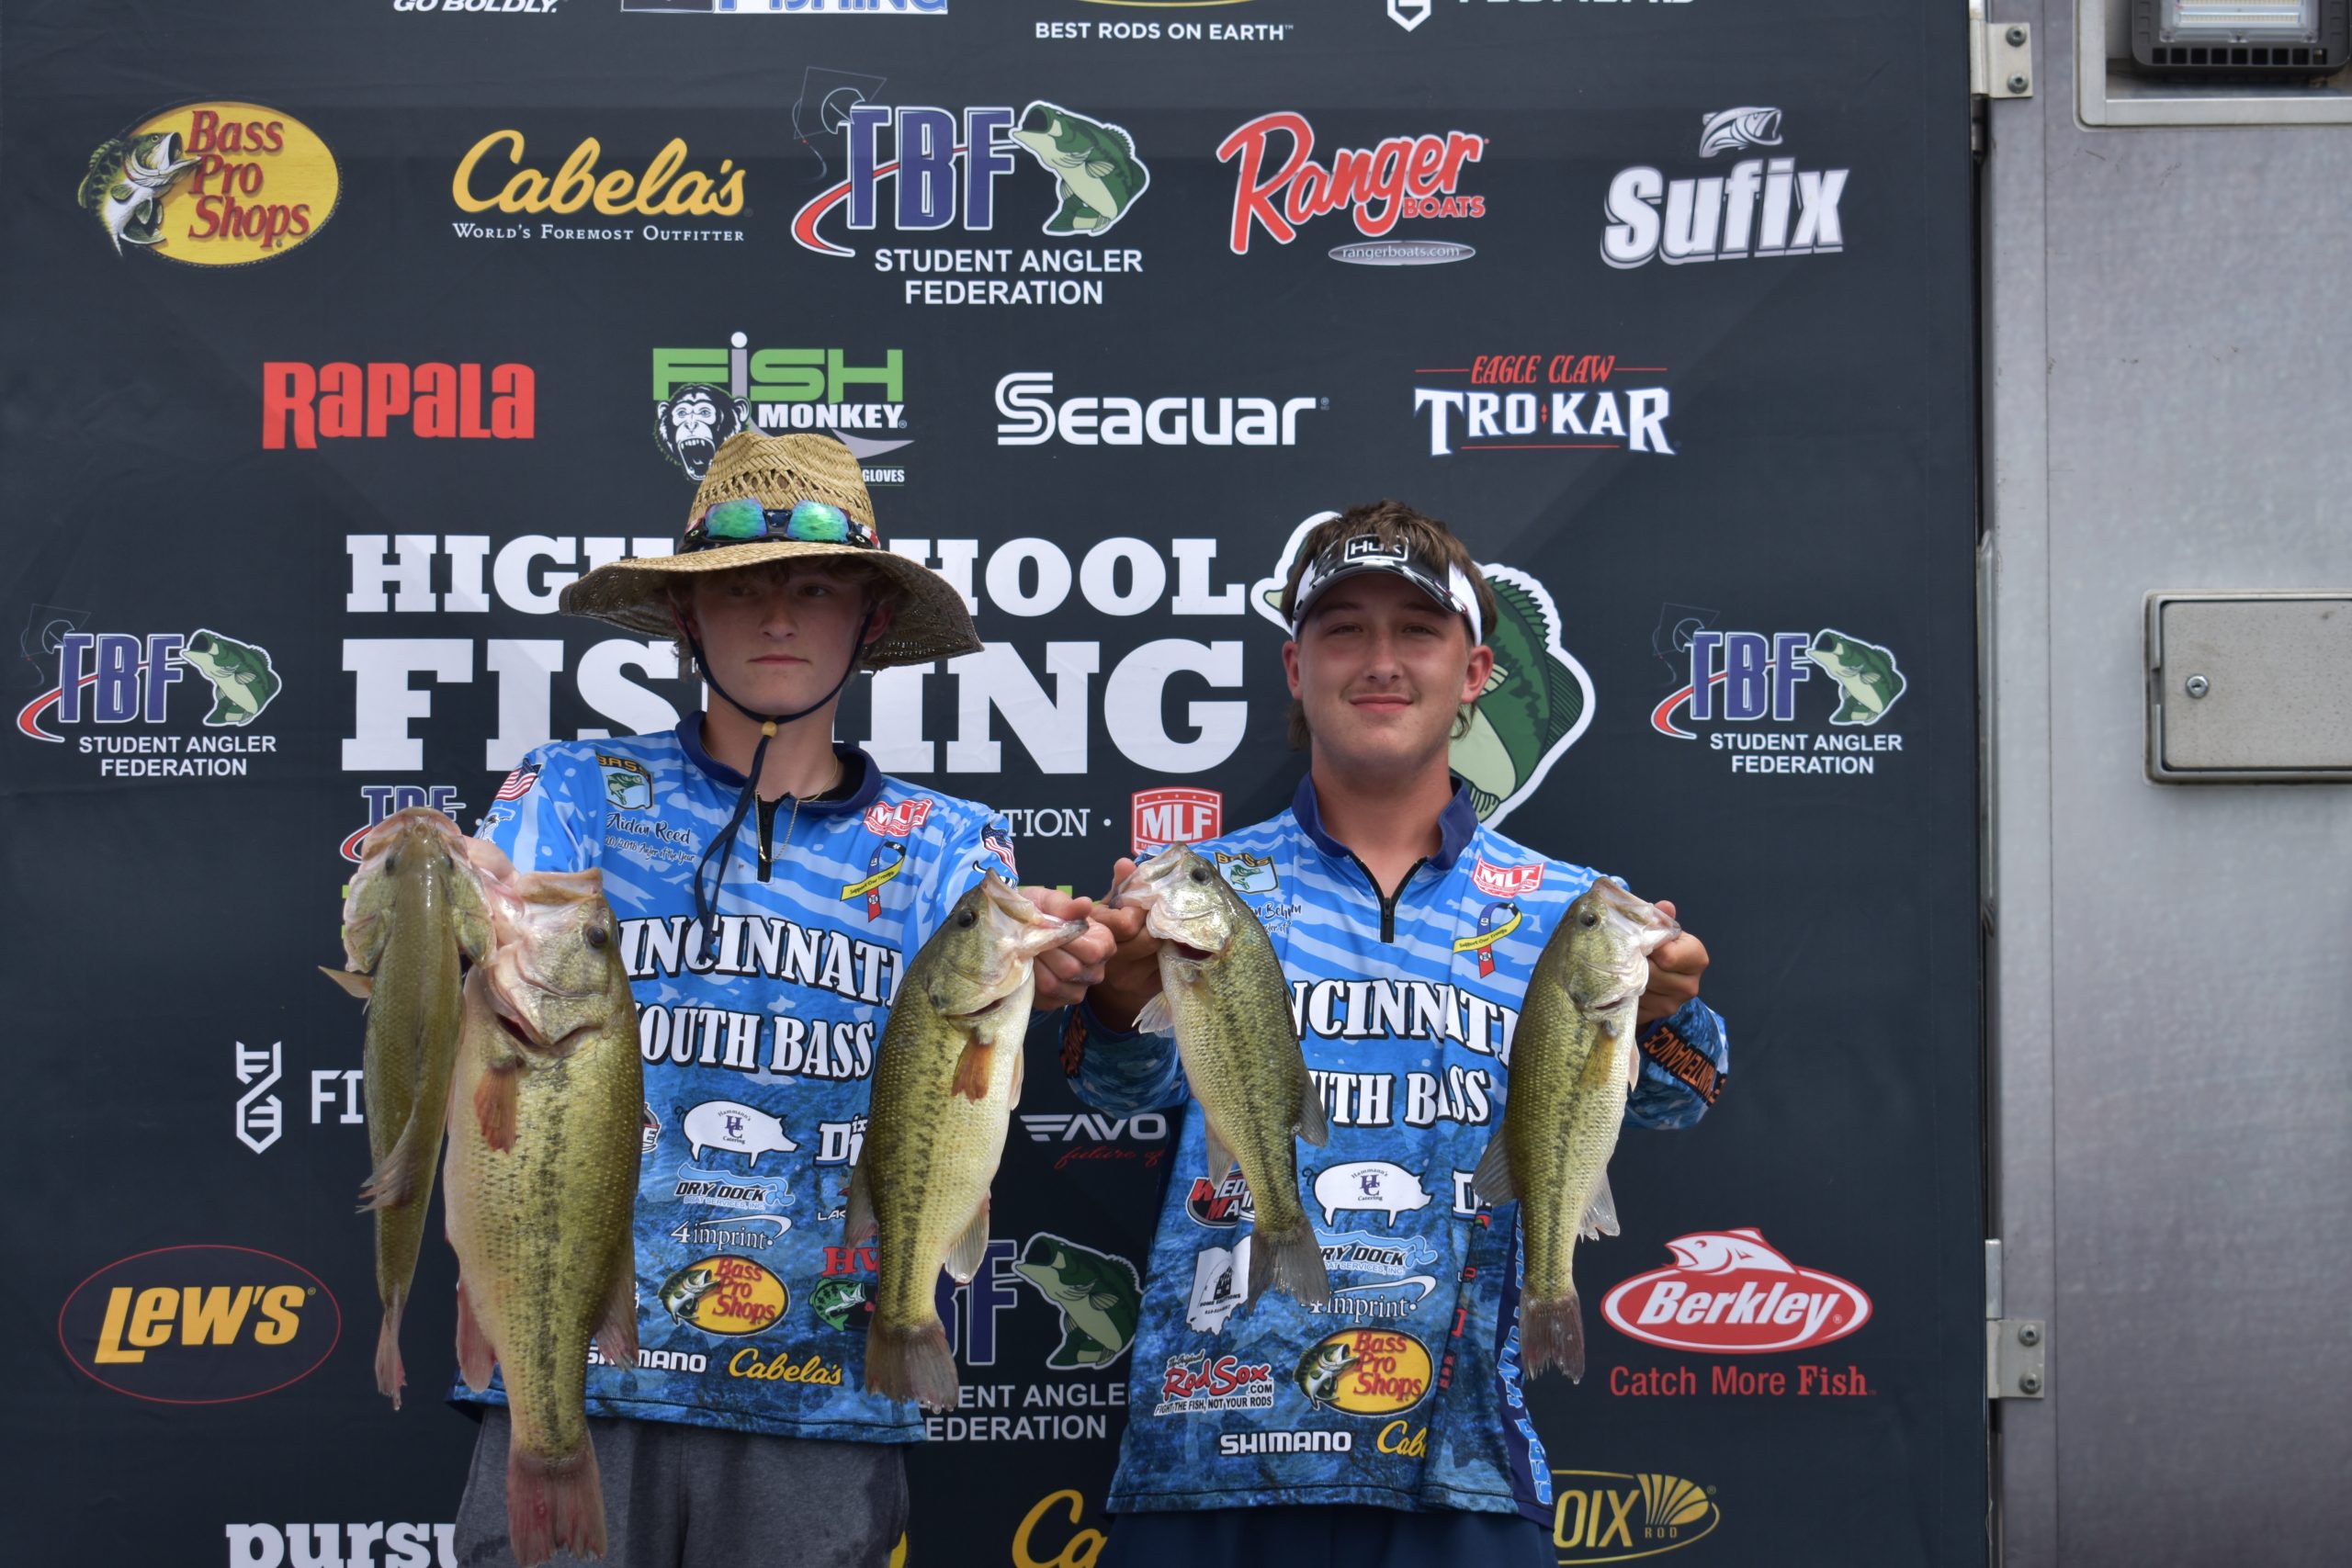 https://highschoolfishing.org/wp-content/uploads/2021/05/winners-with-fish-scaled.jpg